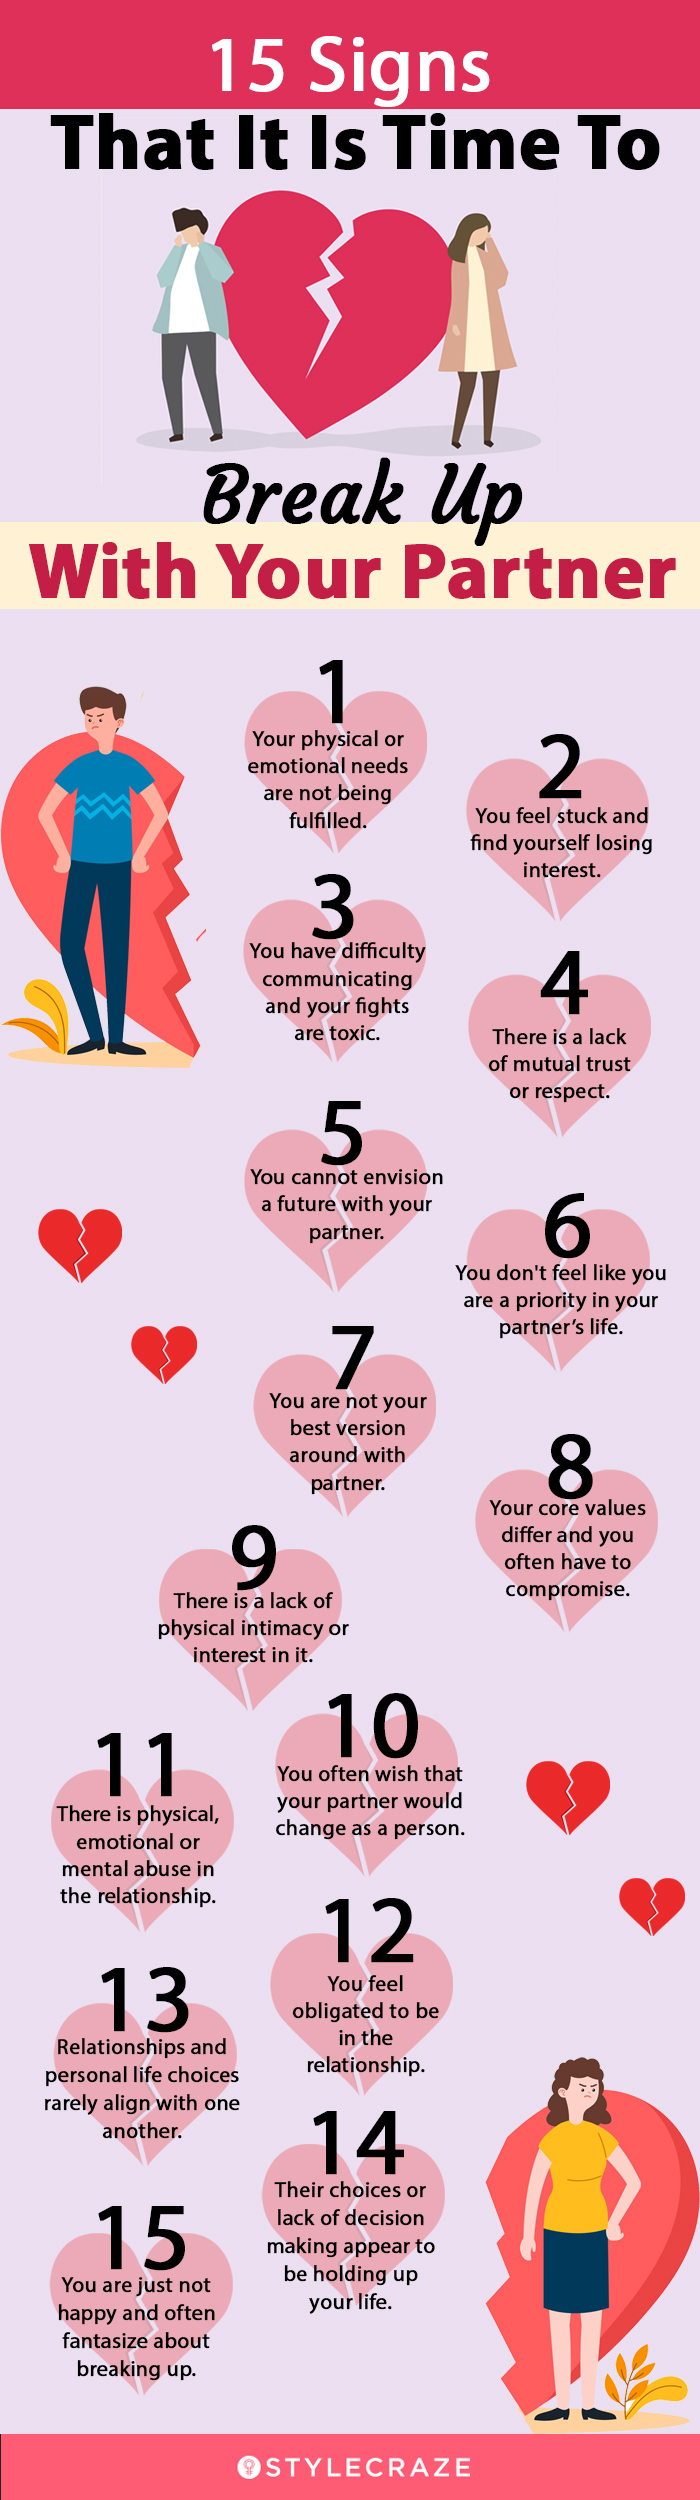 15 signs that it is time to break up with your partner [infographic]